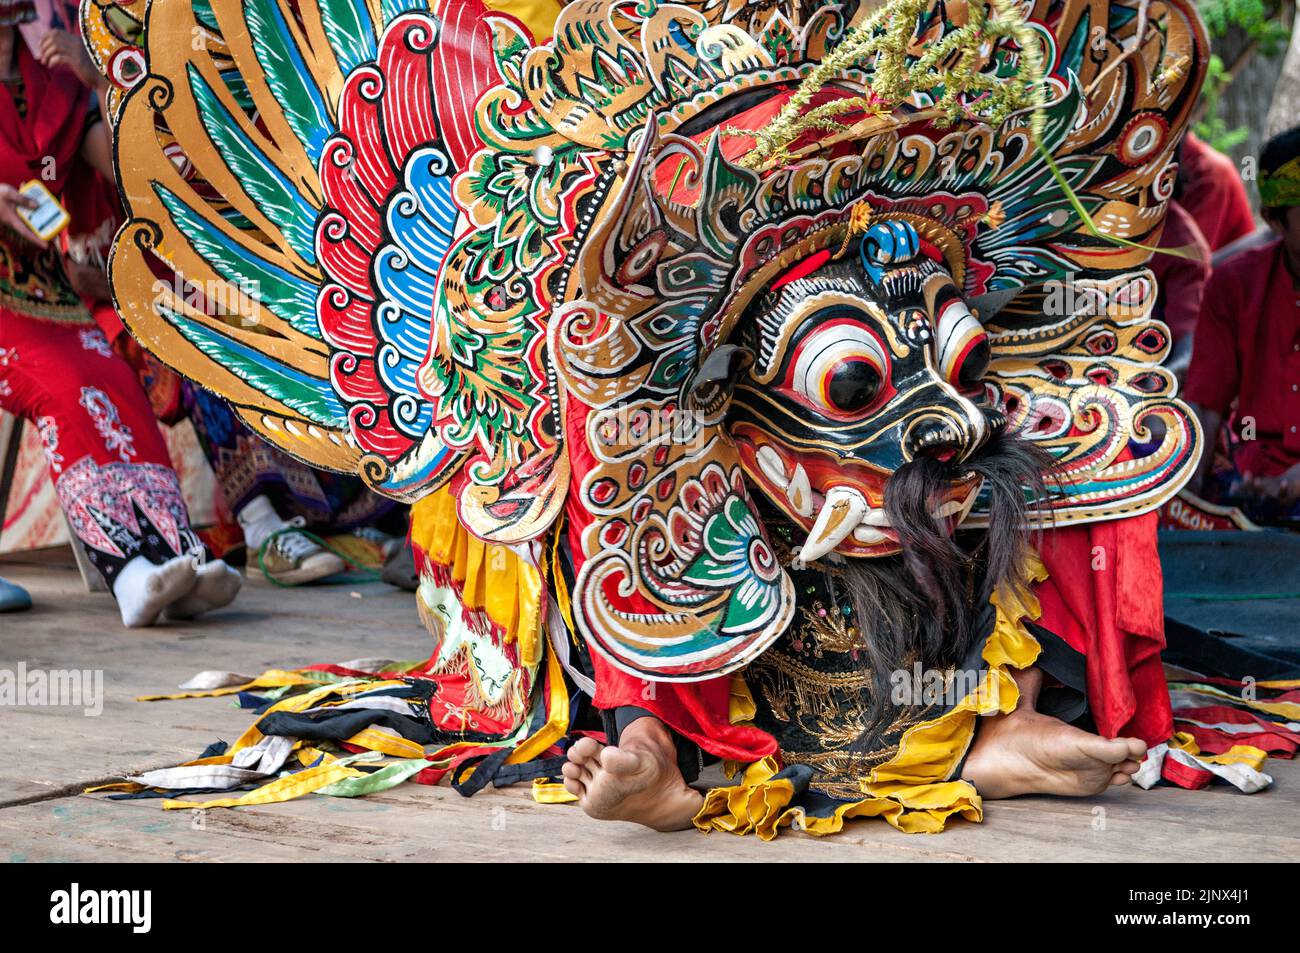 Large mask during a Barong dance in a village, East Java province, Indonesia Stock Photo